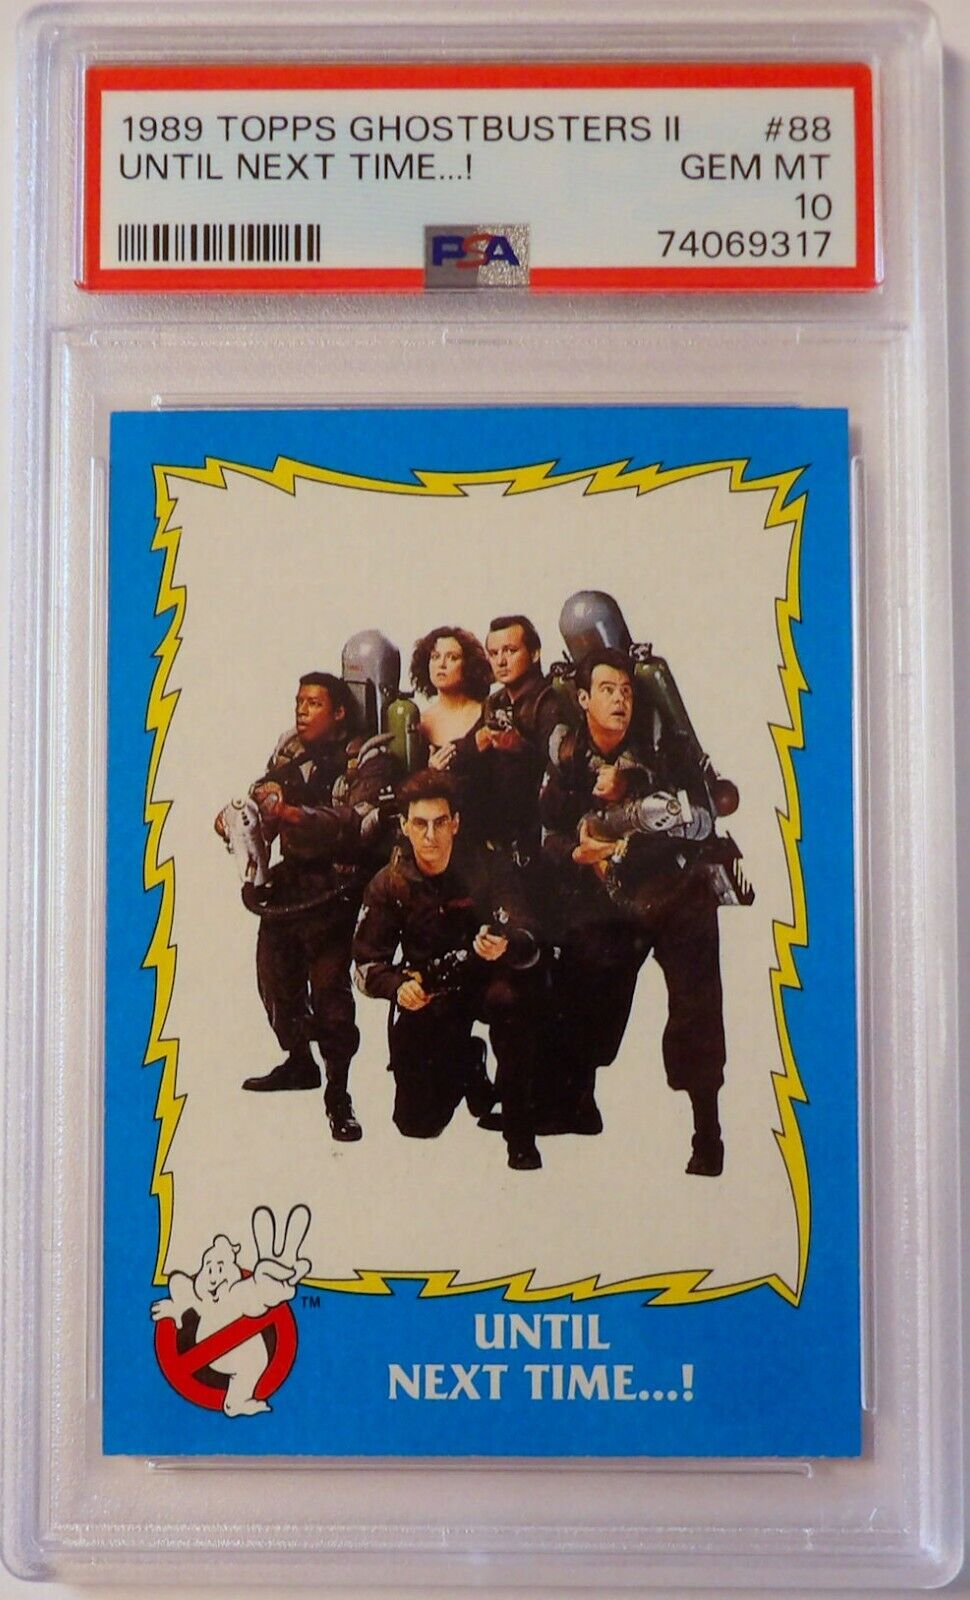 1989 Topps Ghostbusters II #88 Until Next Time PSA 10